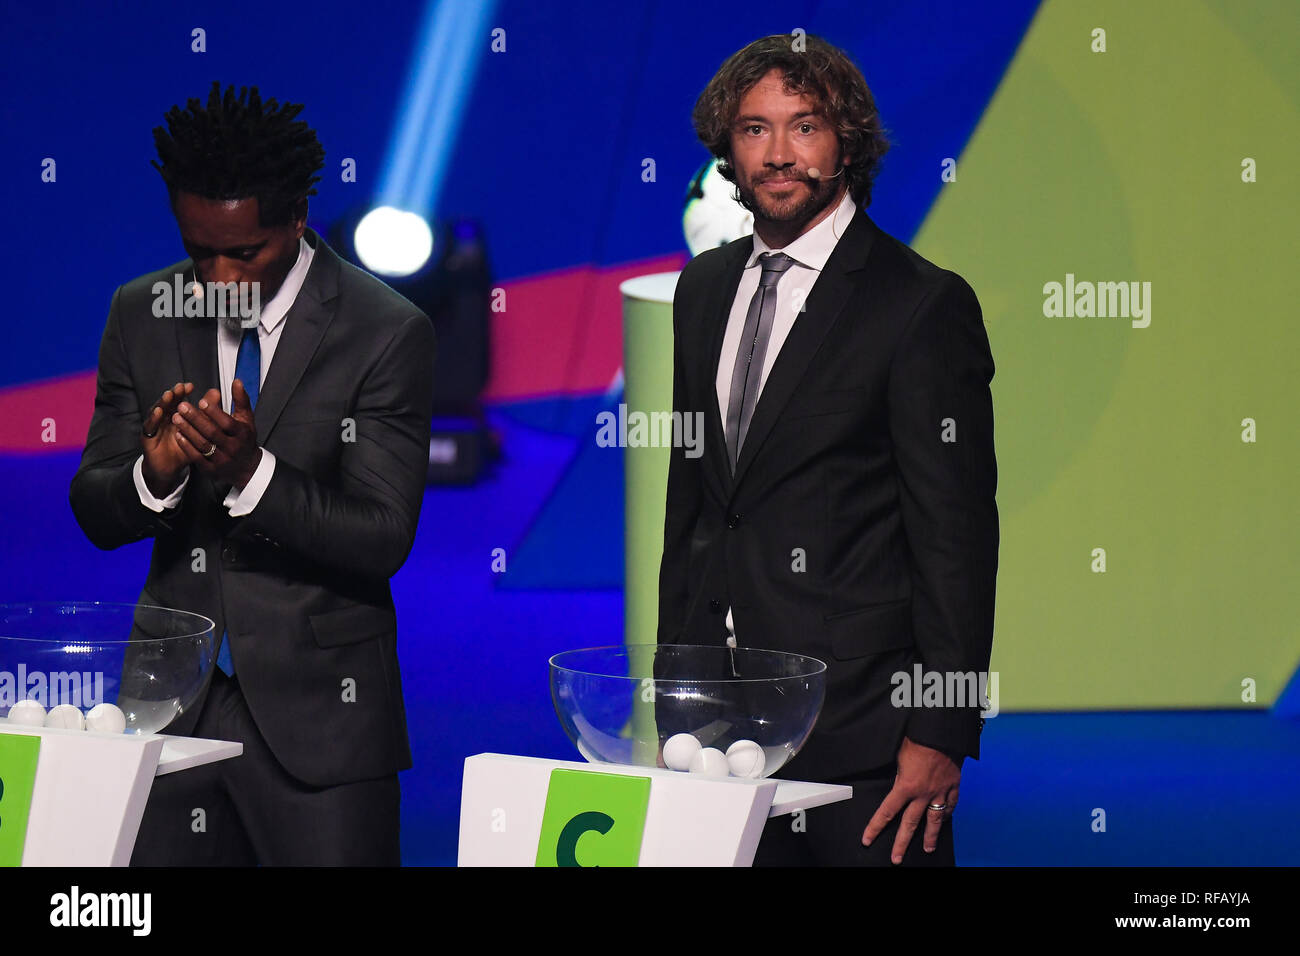 Rio de Janeiro, Brazil. 24th January, 2019. RJ - Rio de Janeiro - 24/01/2019 - Copa America 2019, Group Draw - Former Uruguayan player Diego Lugano, during the 2019 America's Cup draw held in the City of Arts in the western part of the city. Photo: Thiago Ribeiro / AGIF Credit: AGIF/Alamy Live News Stock Photo